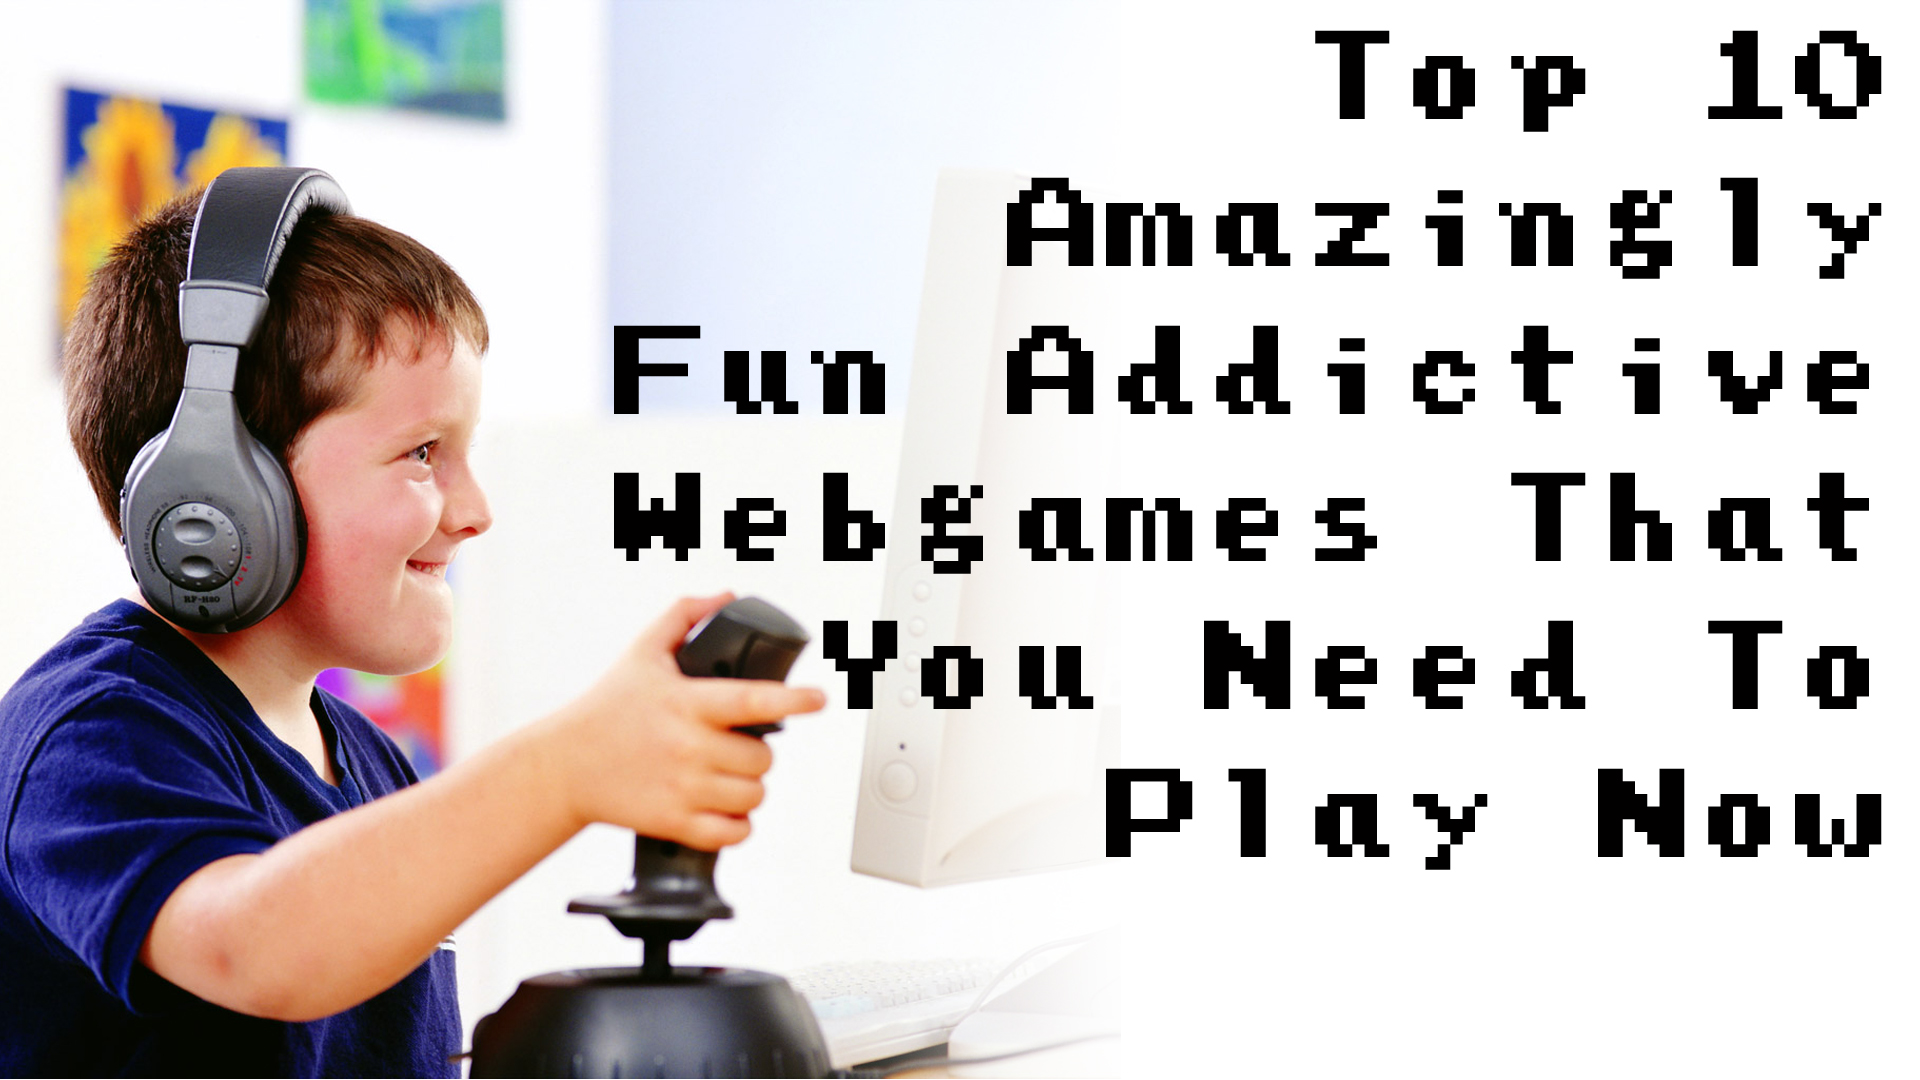 Top 10 Amazingly Fun Addictive Webgames That You Need To Play Now